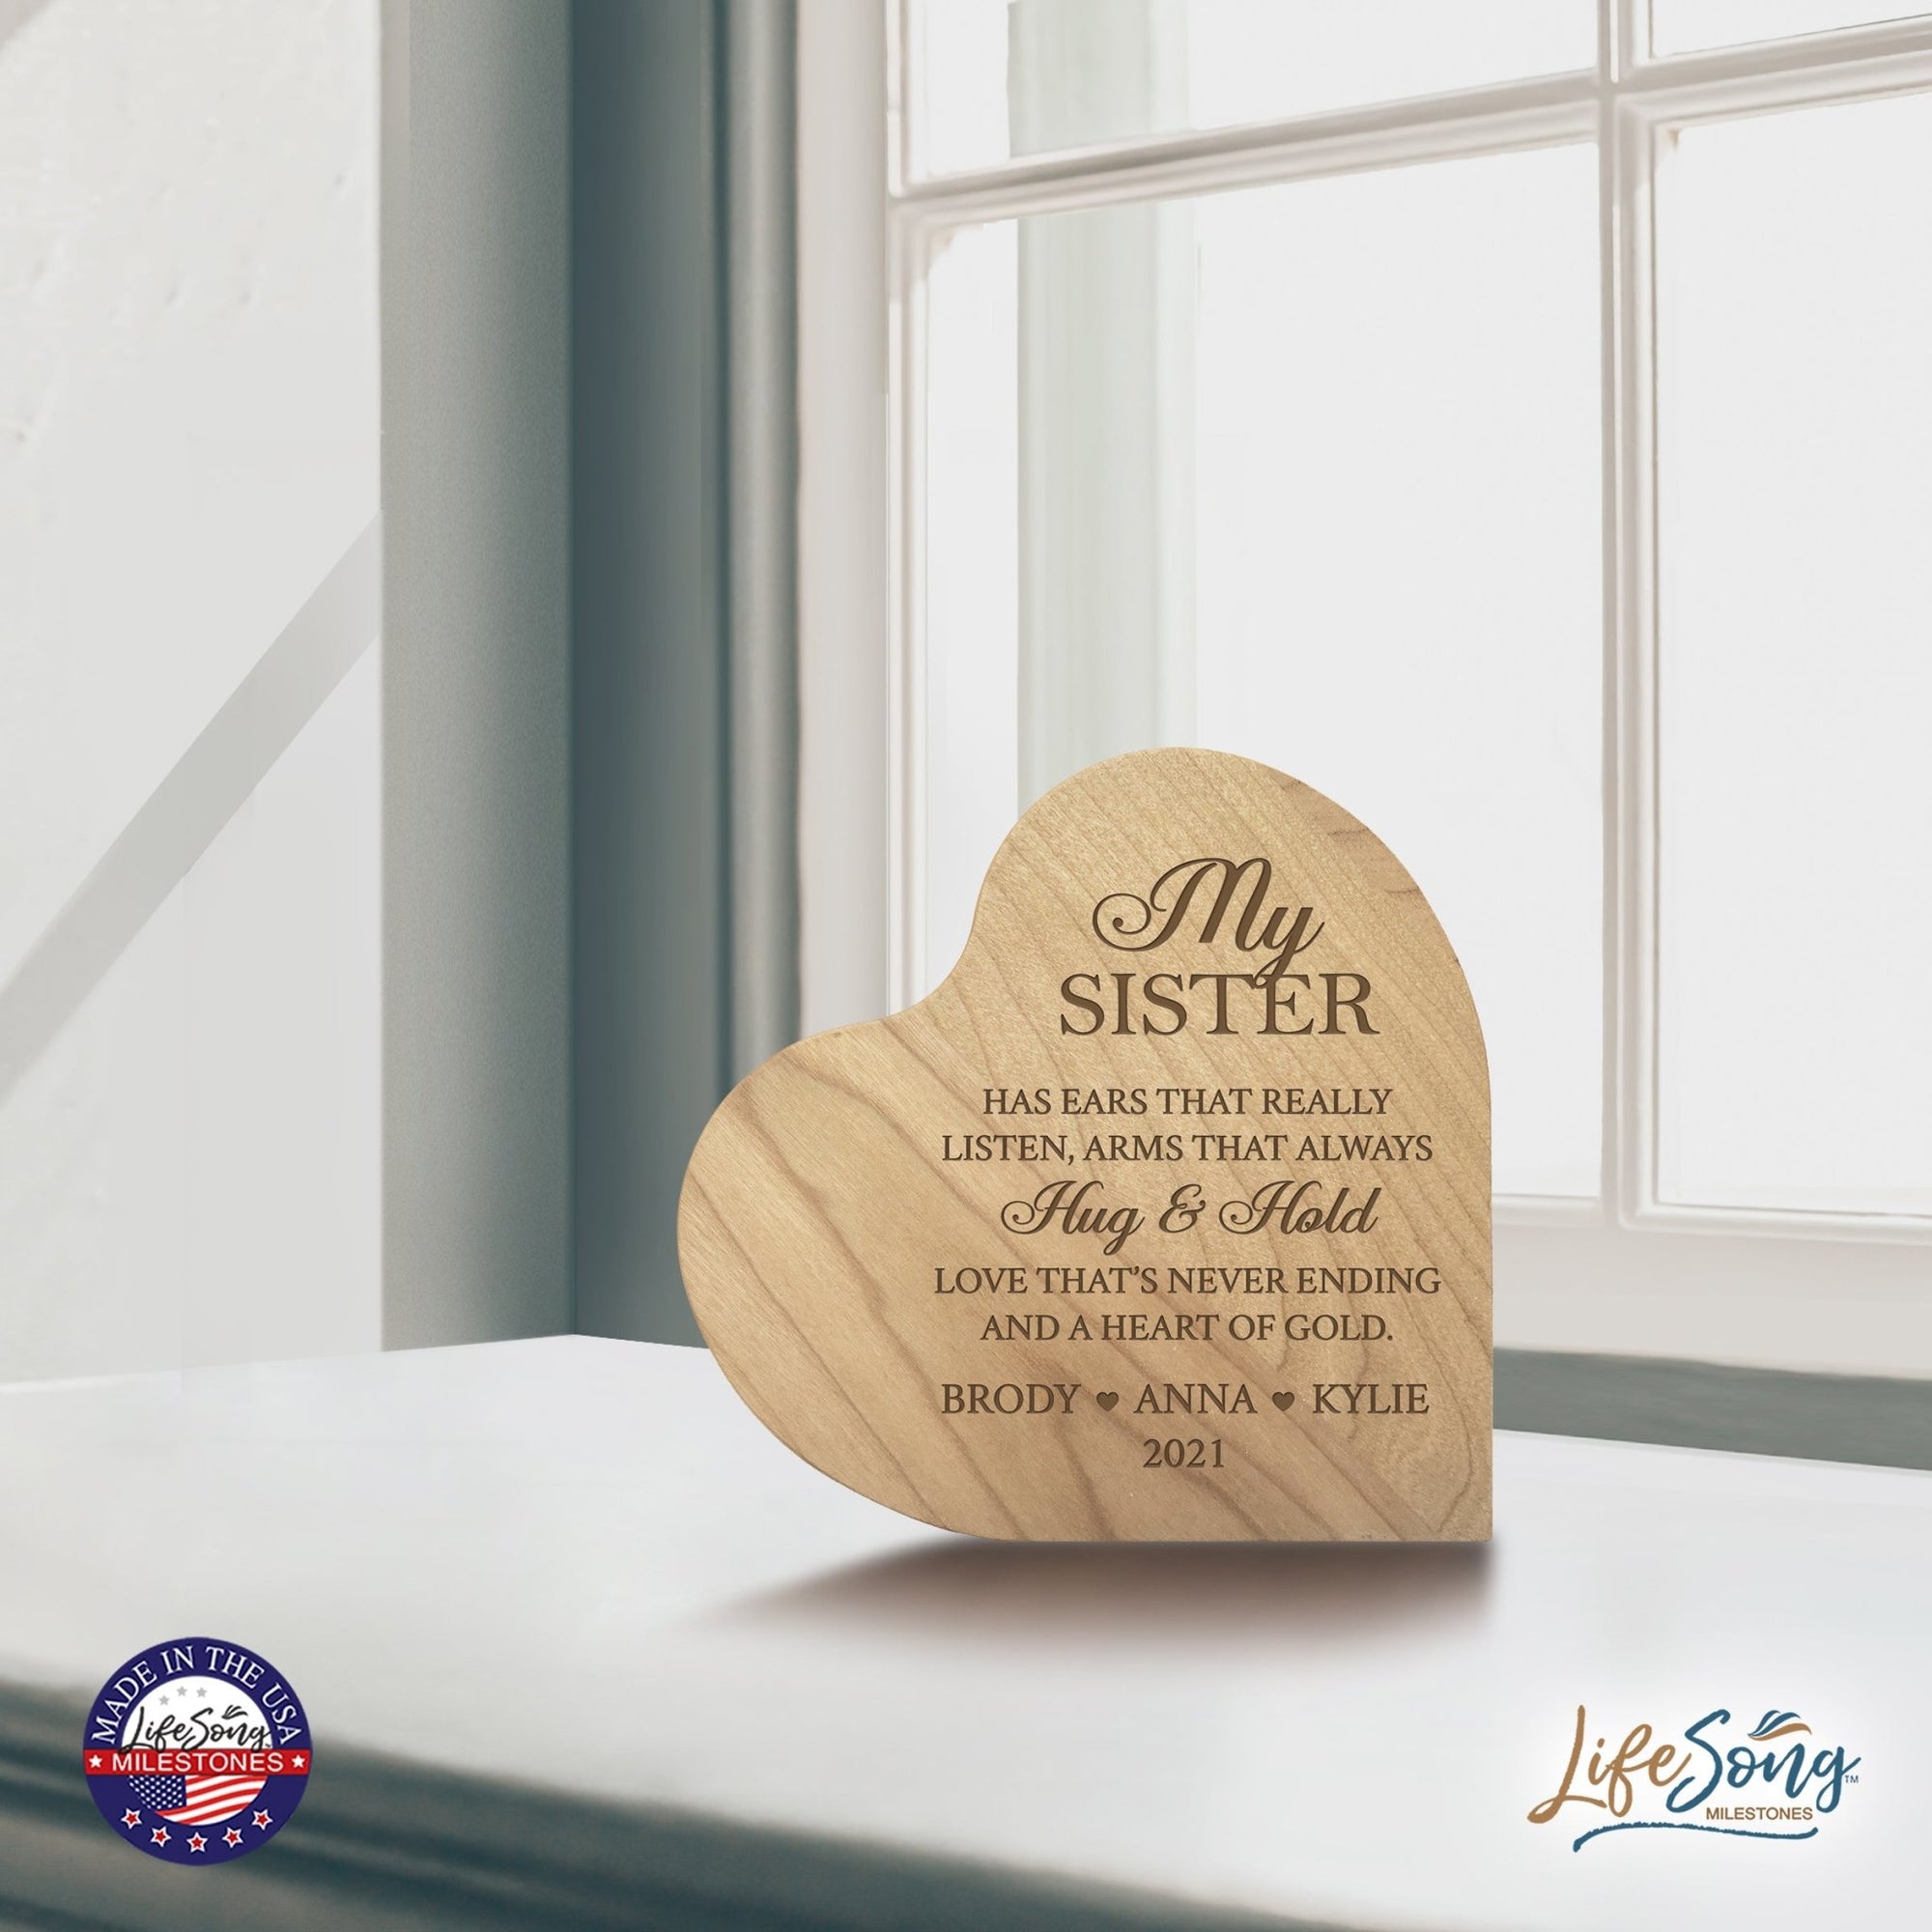 Personalized Sister’s Love Wooden Solid Wood Heart Decoration With Inspirational Verse 5x5.25 - Sister Has Ears That Really = Hug & Hold - LifeSong Milestones